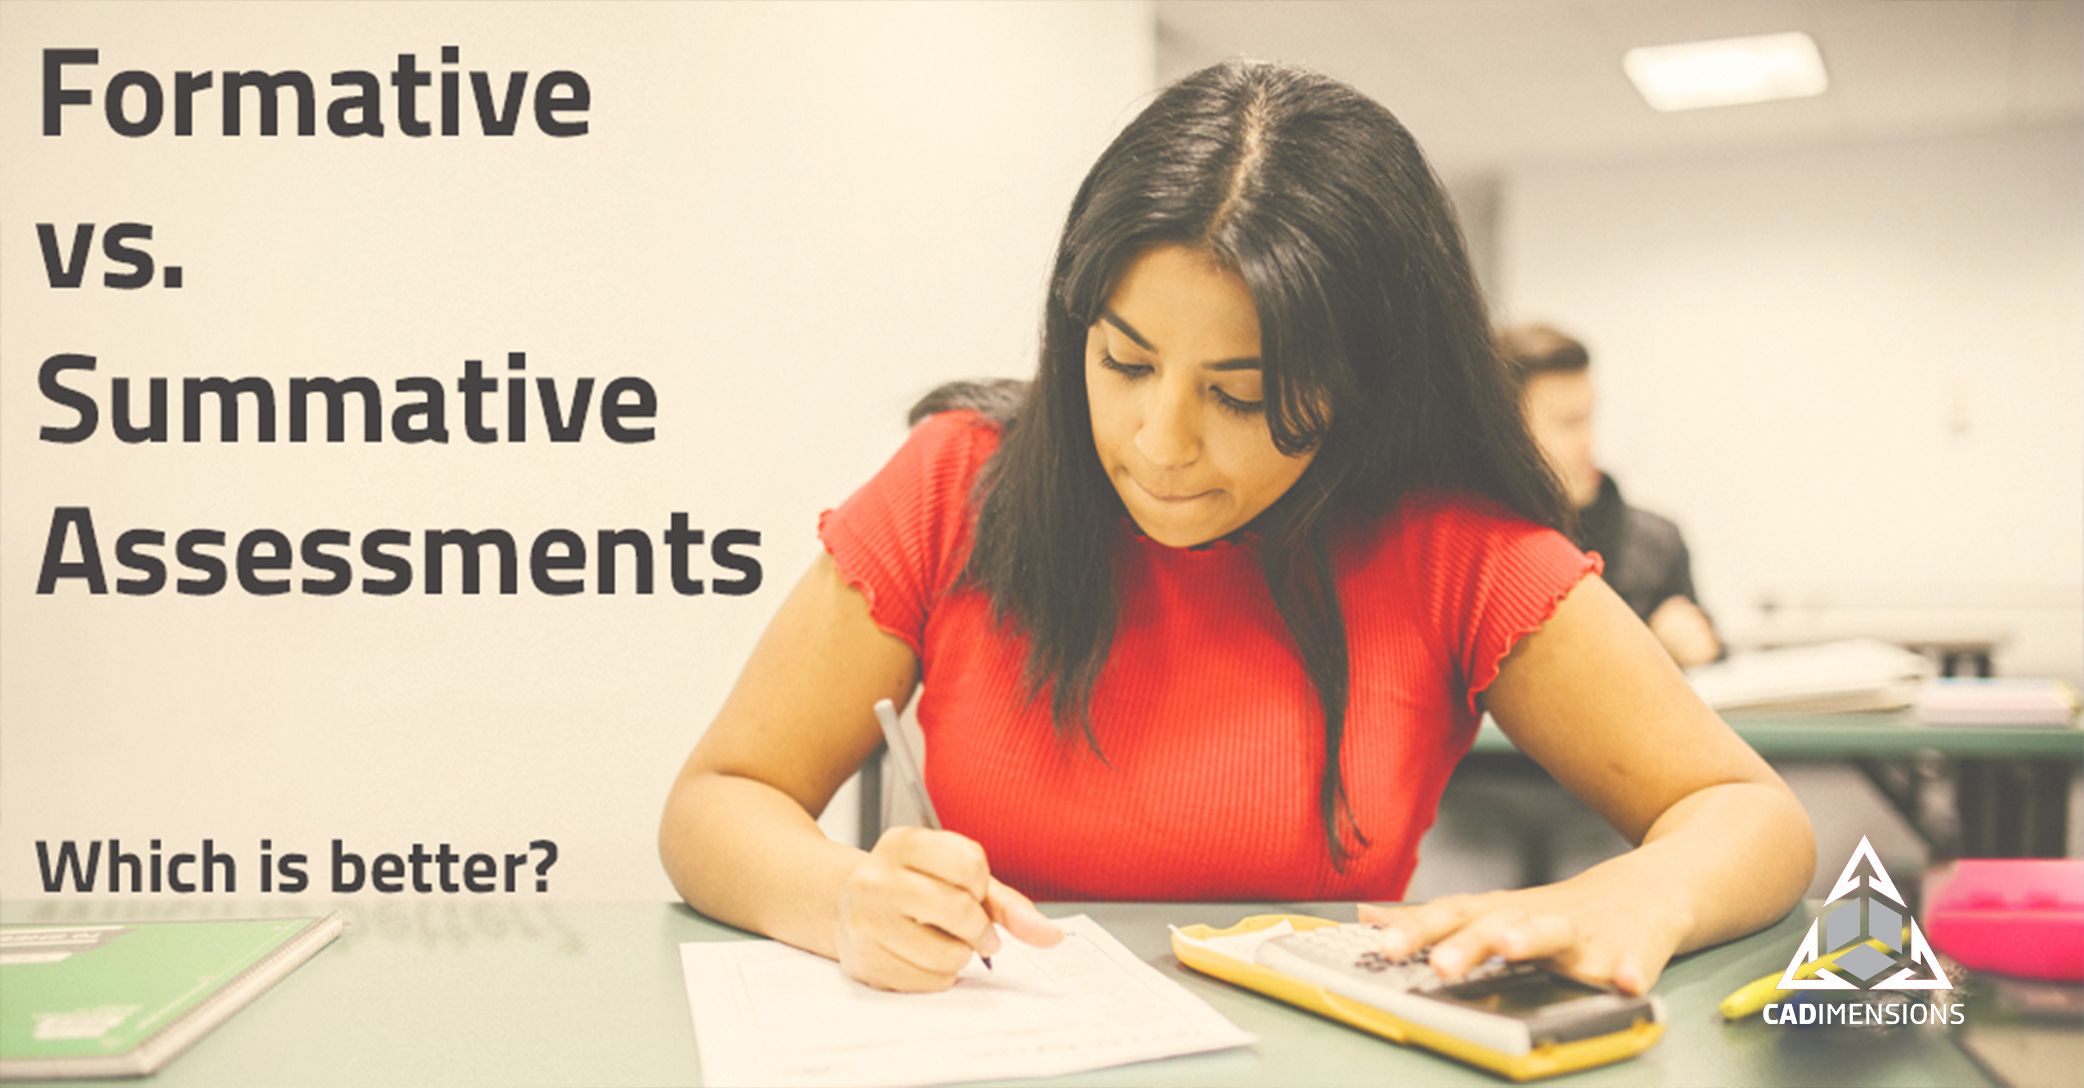 Using Formative Assessment Instead of High Stakes Exams